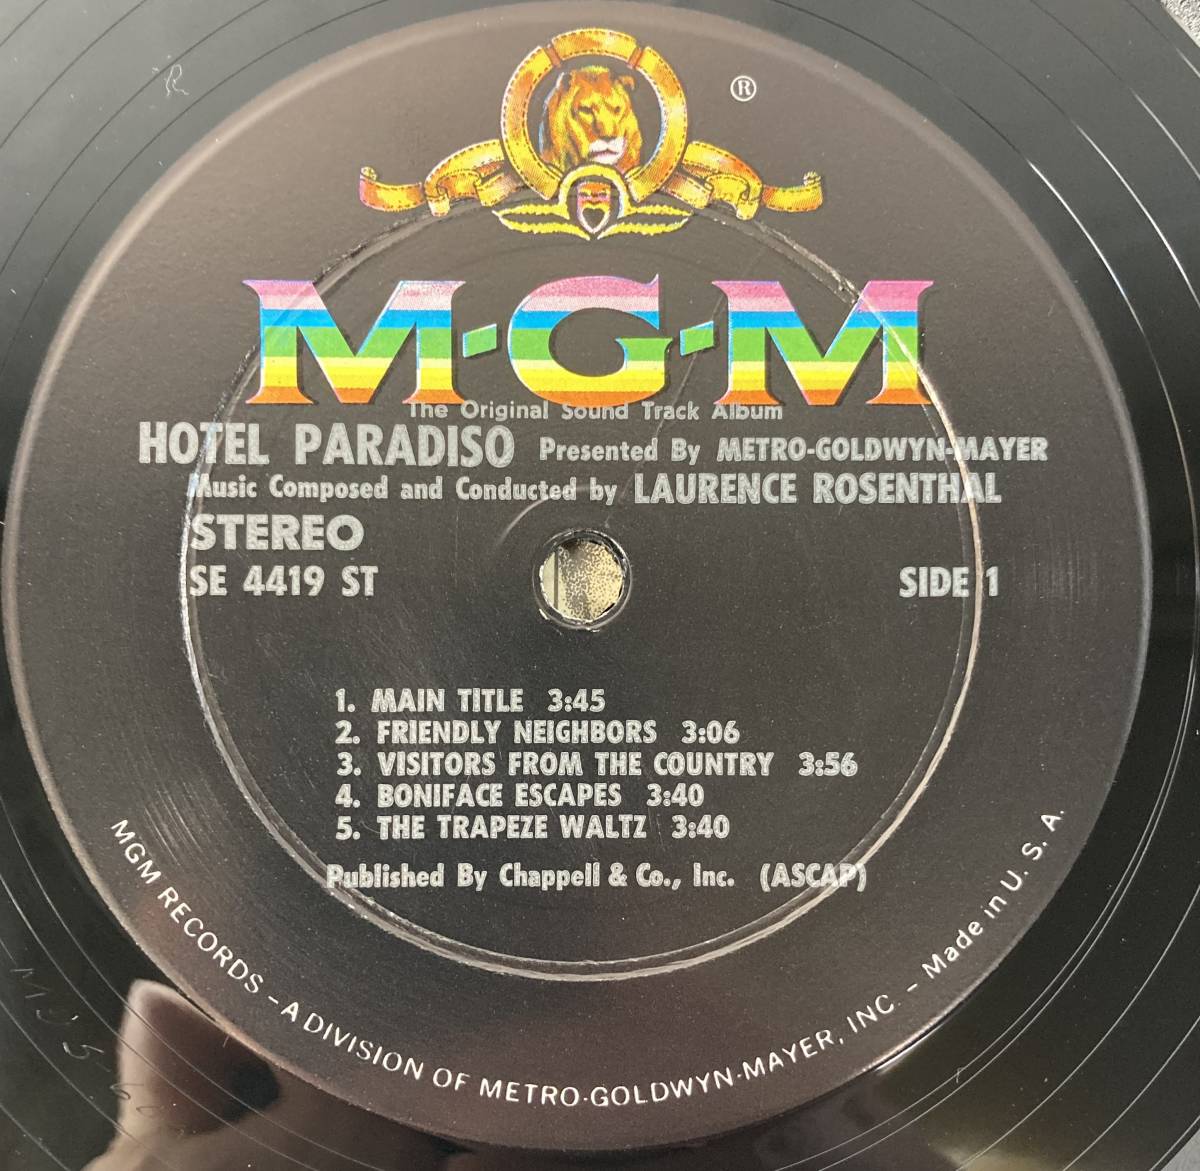  hotel *palatiso(1966) Lawrence * Rosenthal rice record LP MGM SE-4419 ST STEREO Cutout